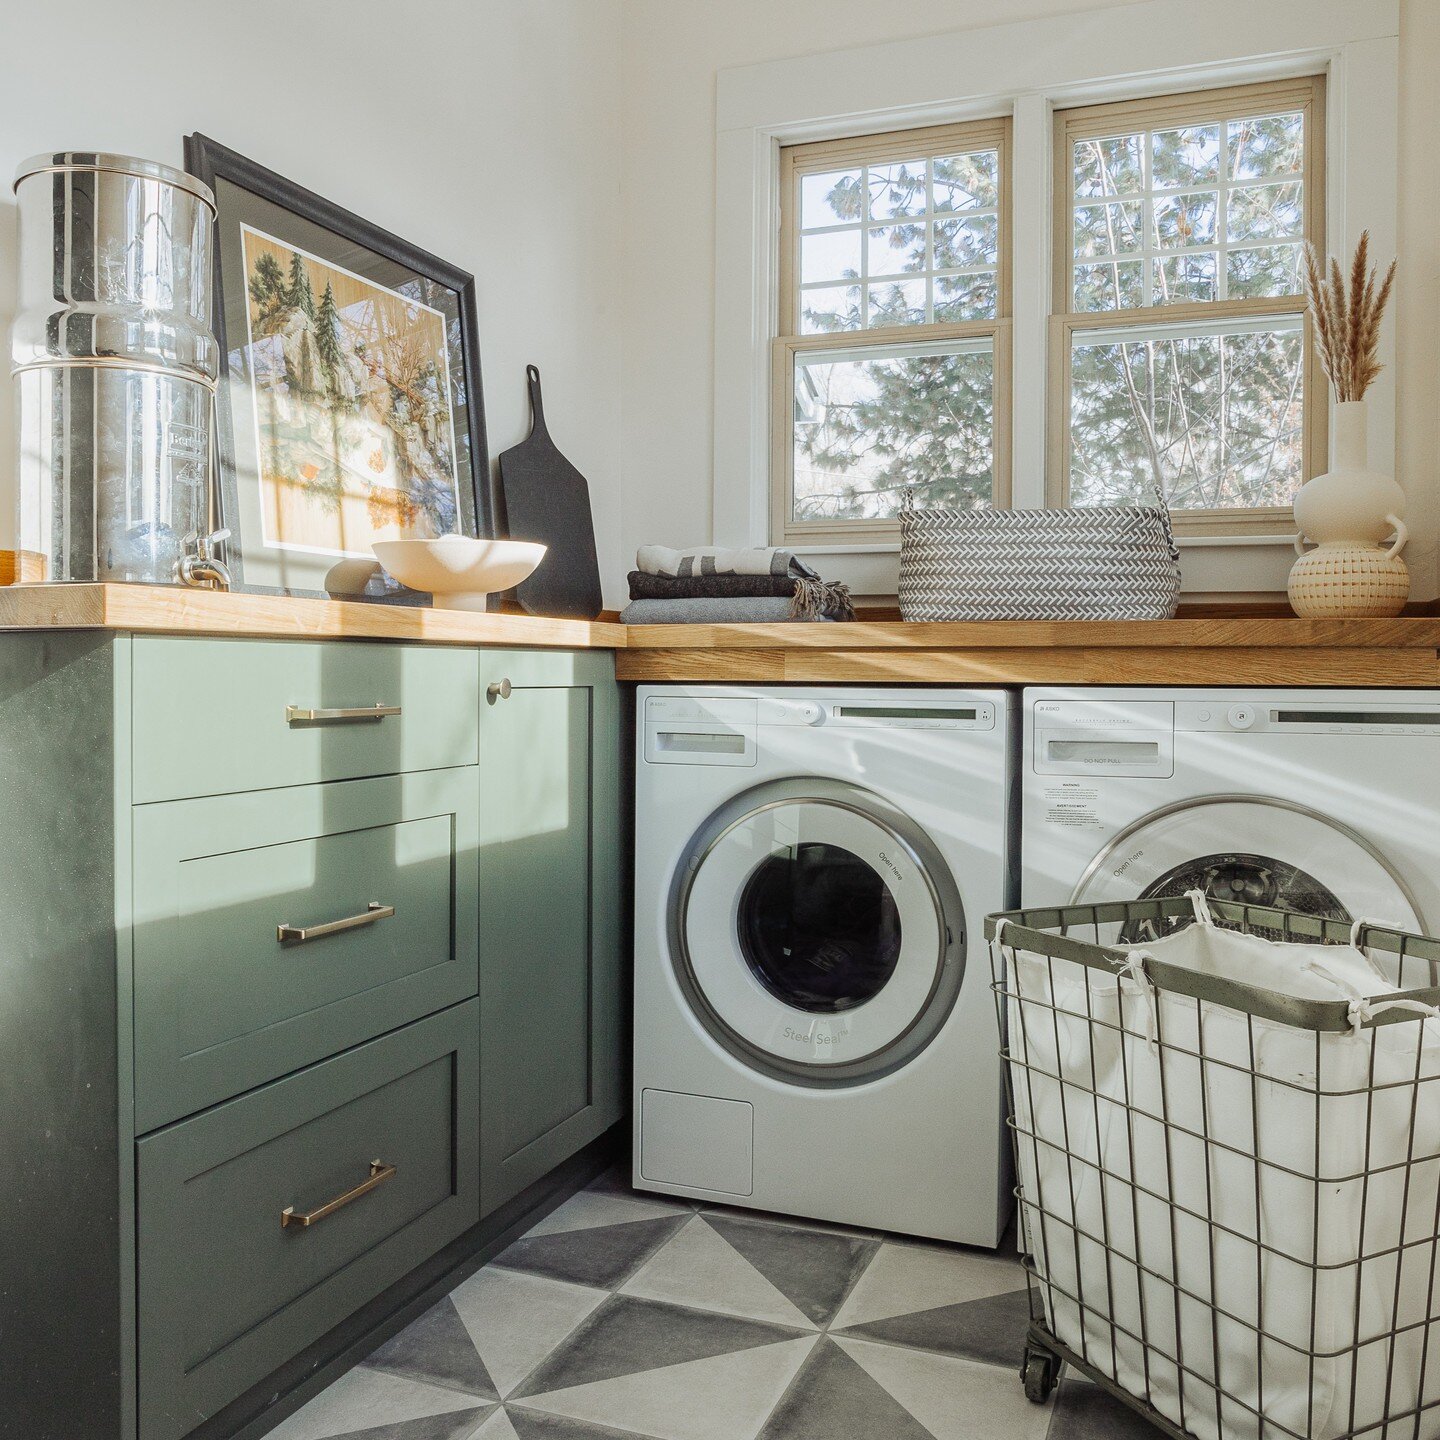 This was once a catch-all storage space, so we moved the washer/dryer up from the basement. Who wouldn't want to do laundry here in this sunny, happy spot? Swipe to see the cute stair risers and the before.

Photo by: @gallivancreative

#bendremodel 